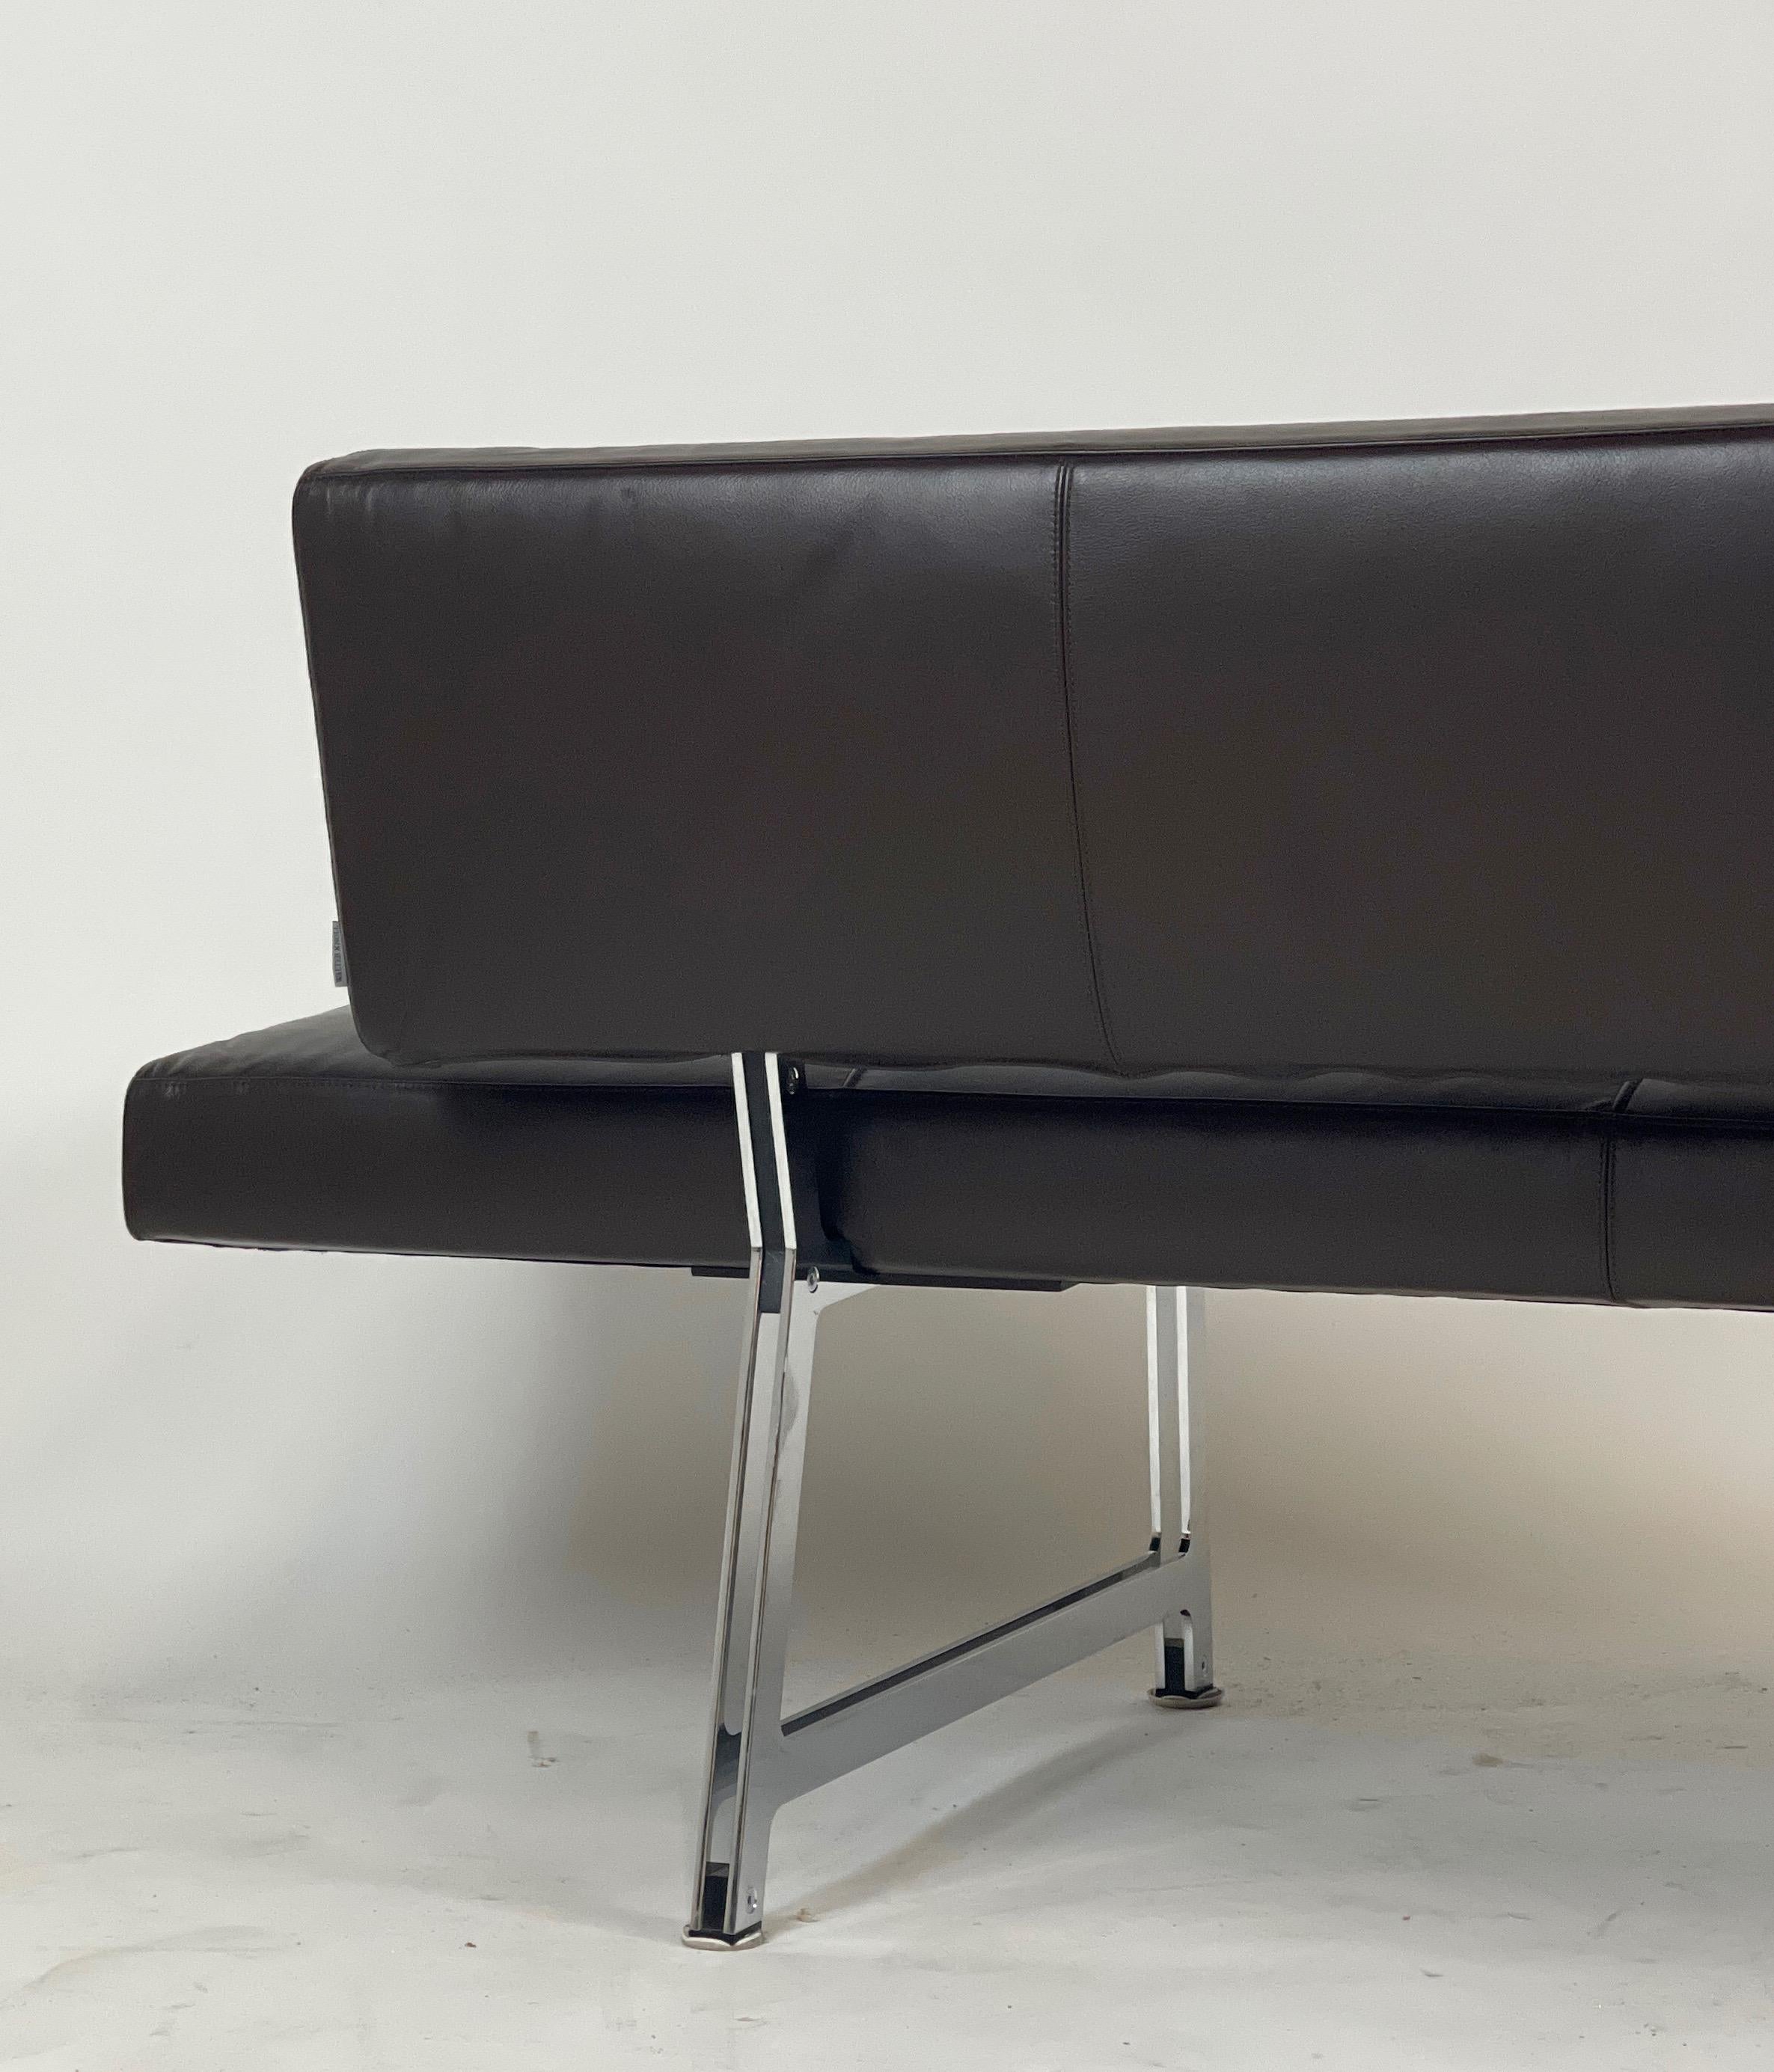 Sleek Norman Foster for Walter Knoll Leather Sofa / Daybed 'Foster 510' 7